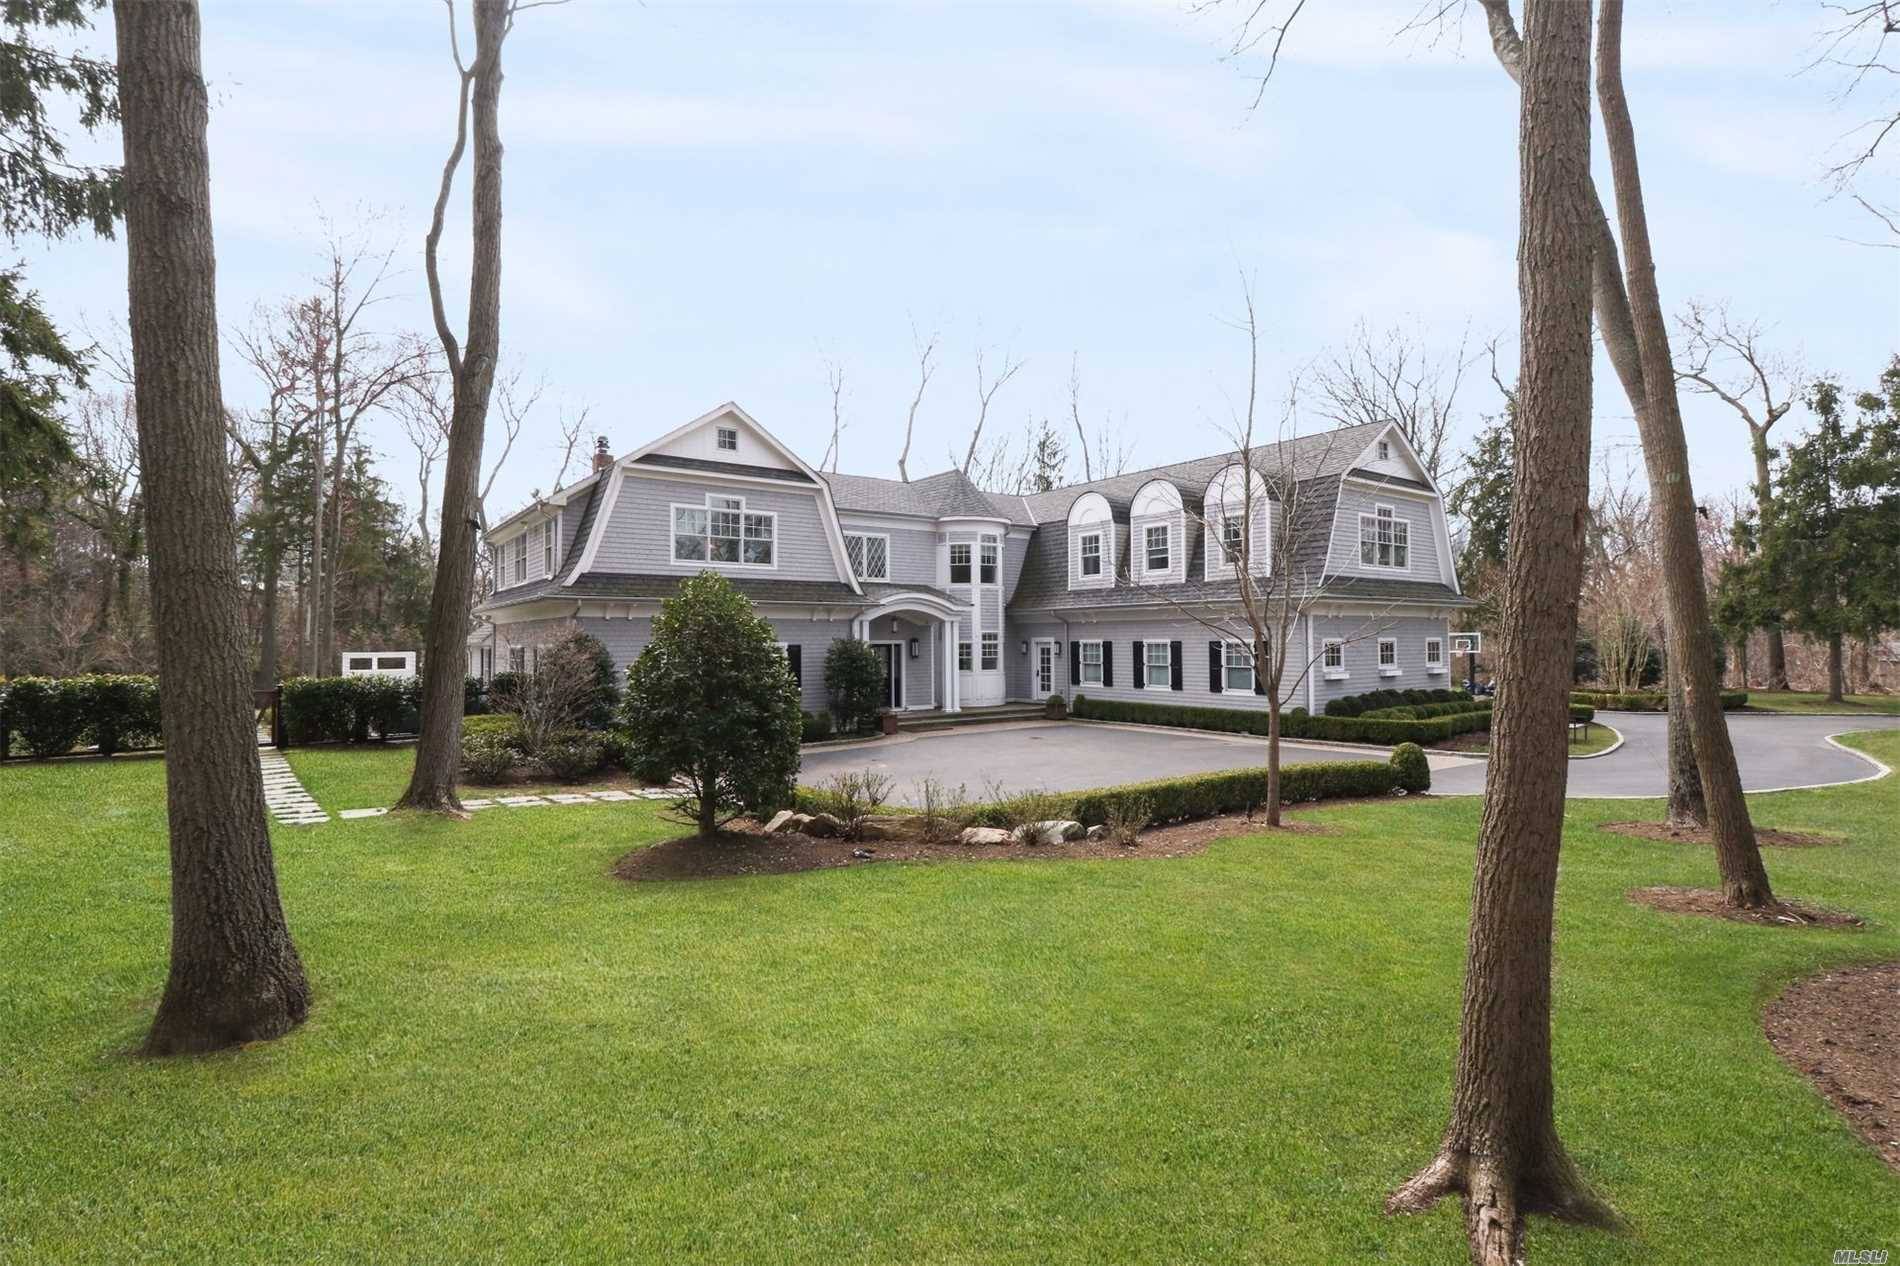 Exquisite details persist in this builders own custom colonial on 2 majestic acres in Muttontown.